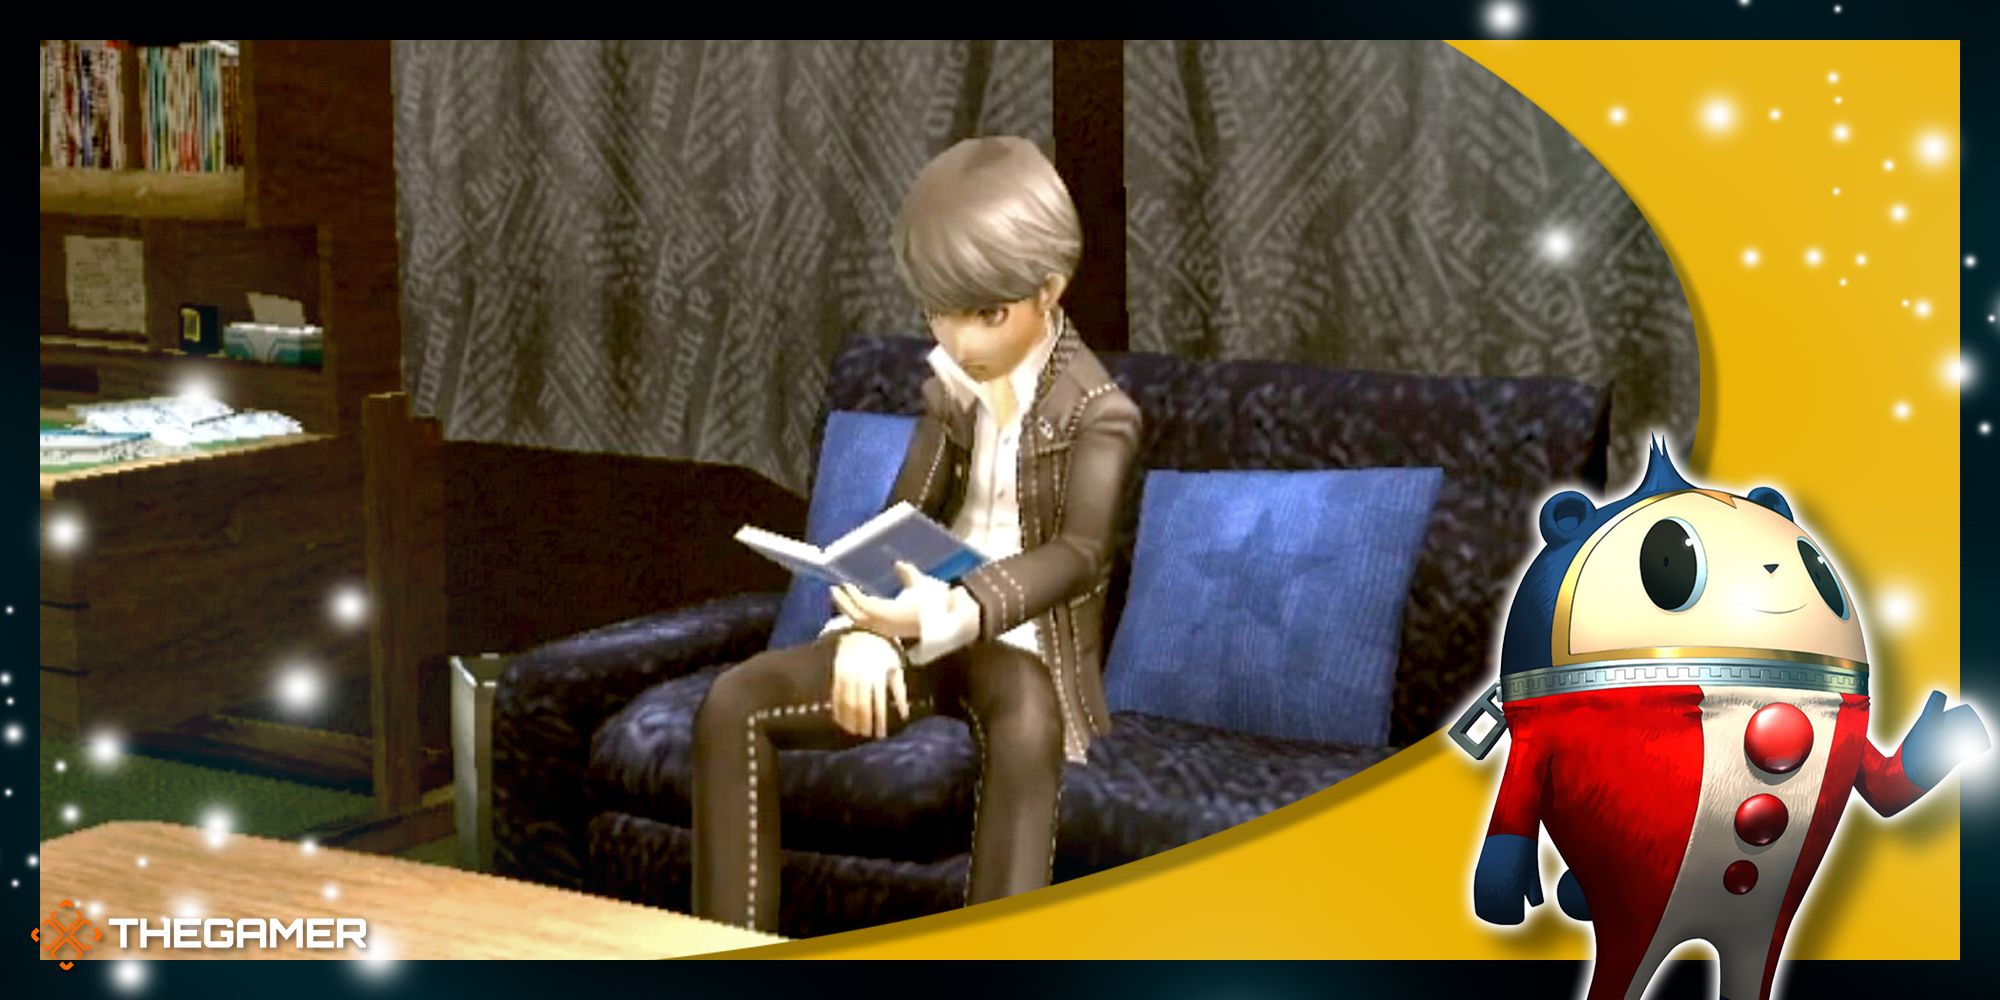 Yu on the couch in his room reading a book in Persona 4 Golden